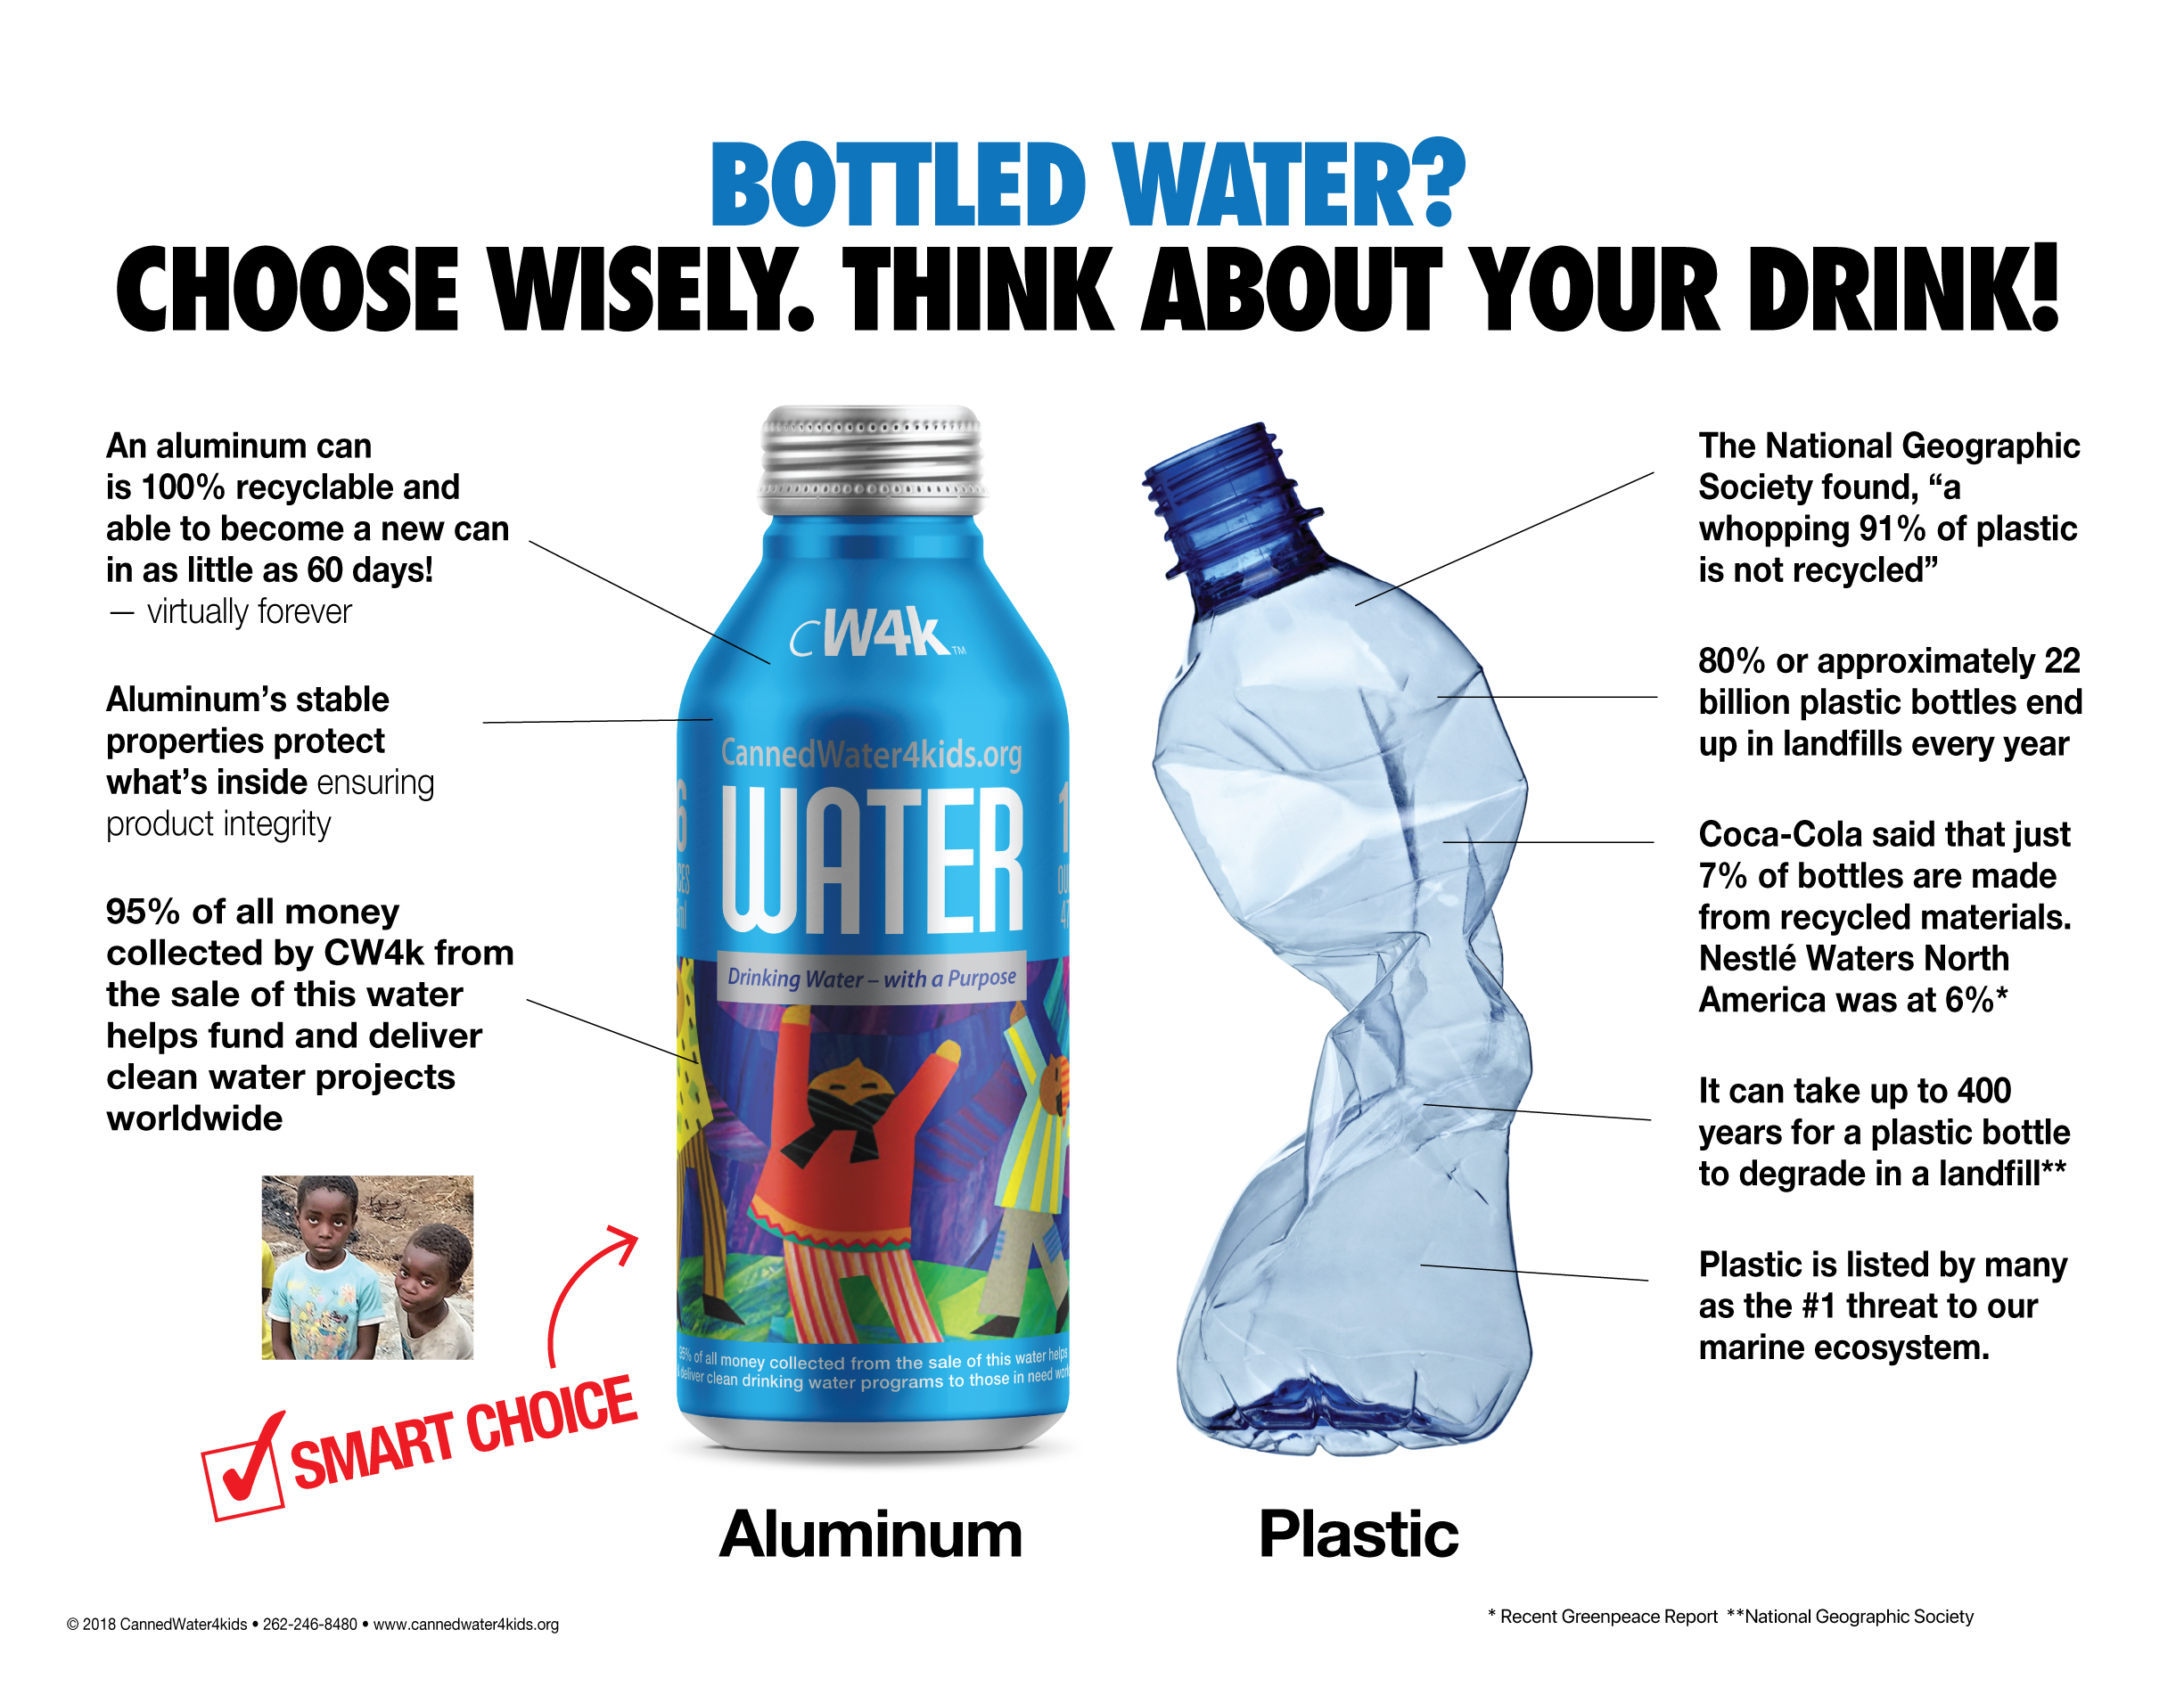 plastic aluminum vs bottles water cans clean drinking drink sustainable rethink infographic switching sustainability deliver fund helps choice projects